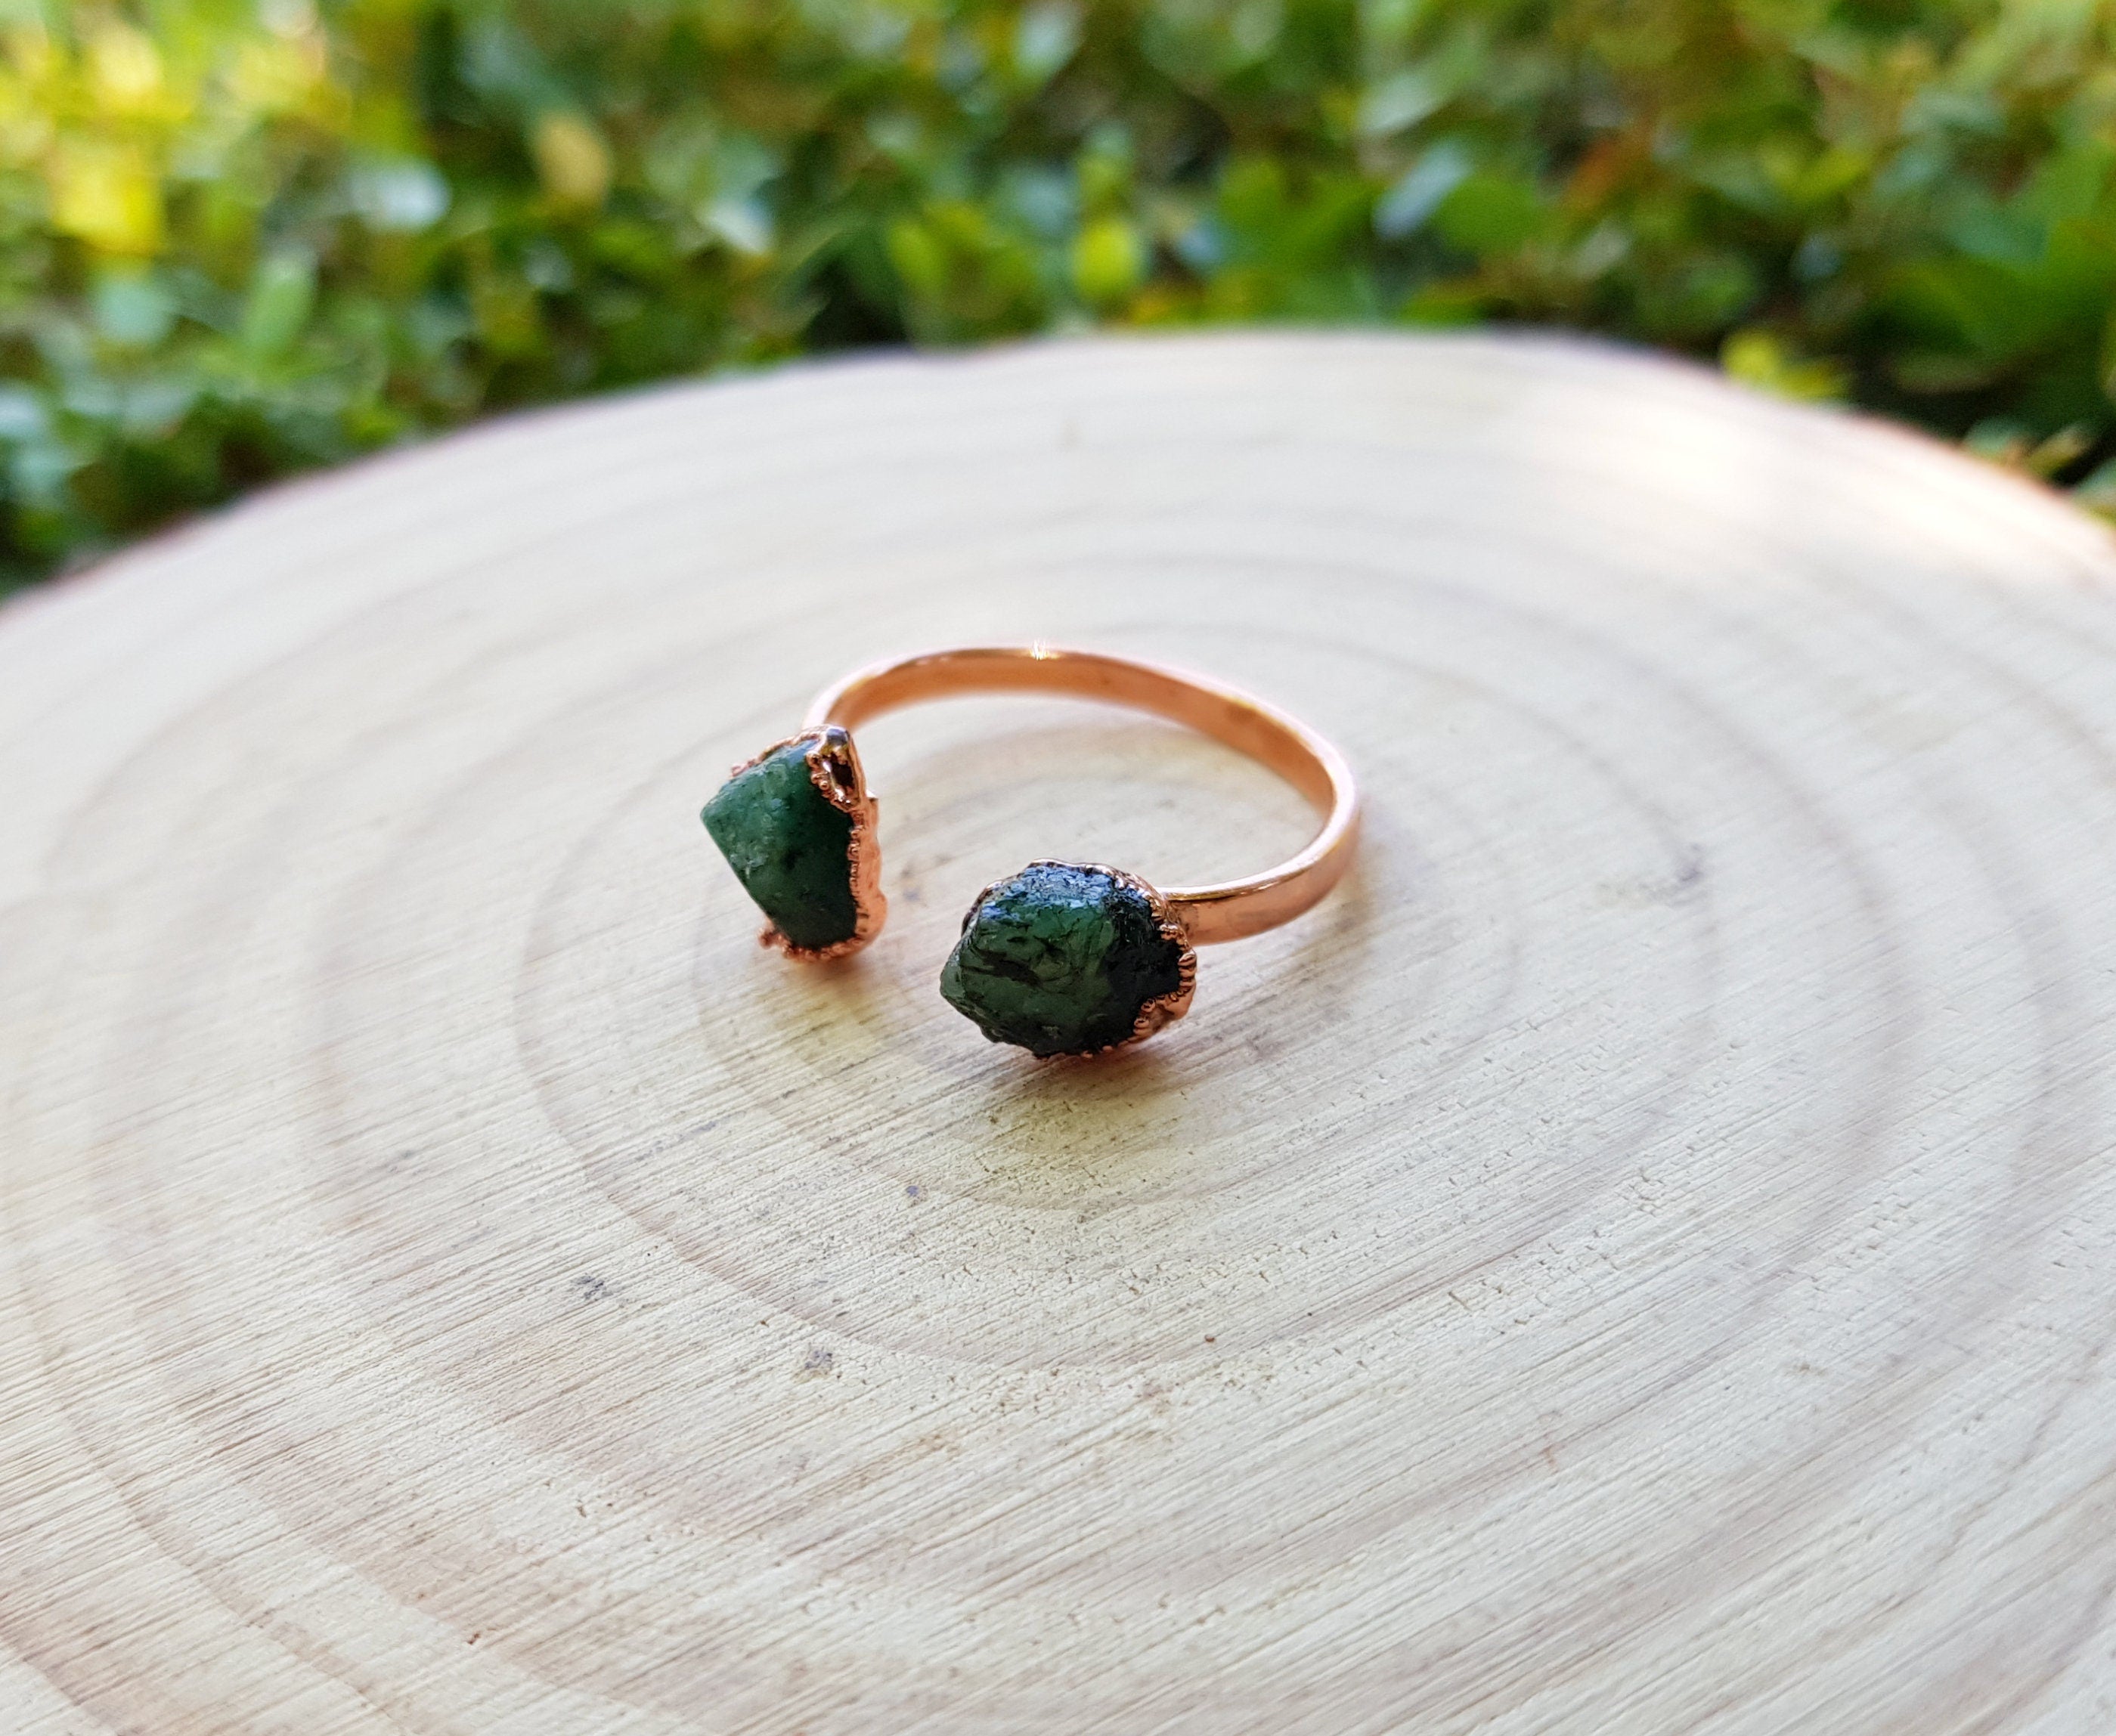 Amethyst and Copper Ring - Bohemian Jewellery – www.indieandharper.com